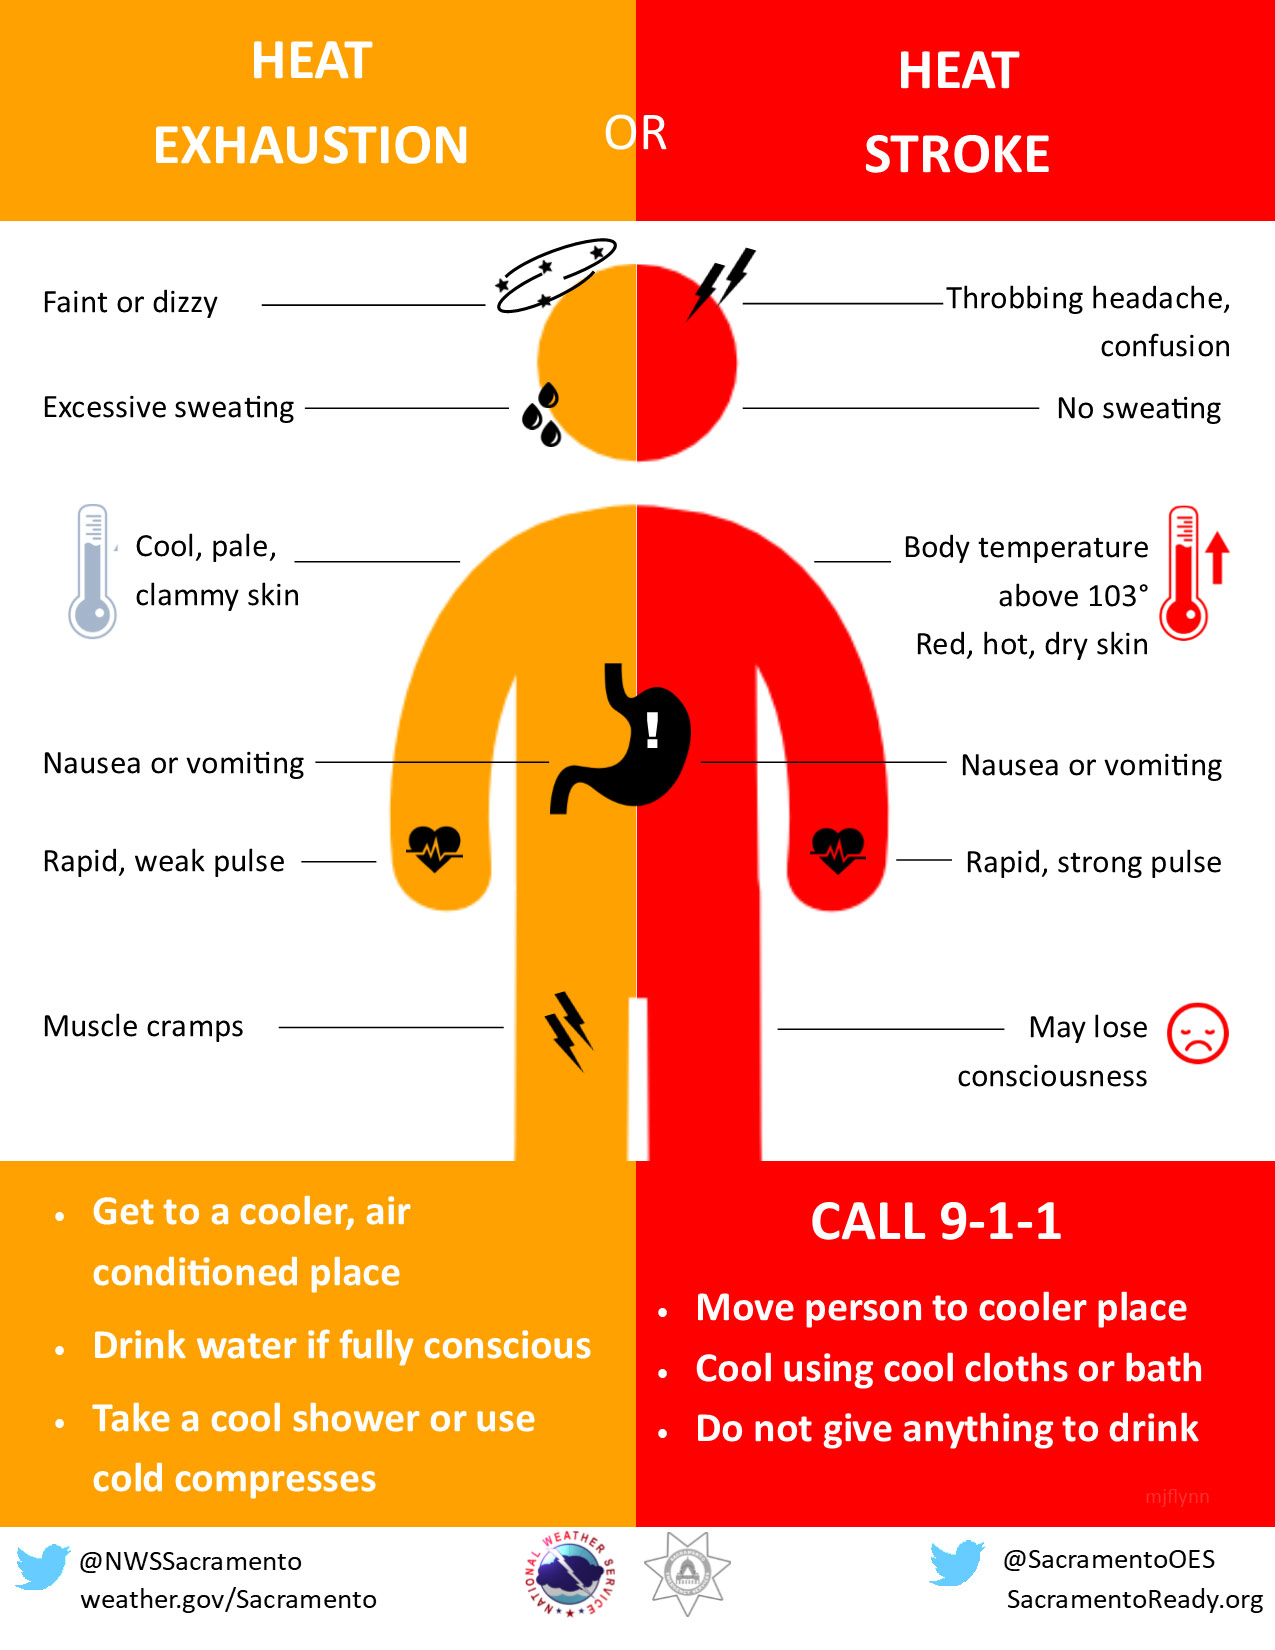 Heat Symptoms:
Heat Exhaustion: faint or dizzy; excessive sweating; cool, pale, clammy skin; nausea or vomiting; rapid, weak pulse; muscle cramps. Get to a cooler, air conditioned place. Drink water if fully conscious. Take a cool shower or use cold compress.
Heat Stroke: throbbing headache, confusion; no sweating; body temperature above 103 degrees; red, hot, dry skin; nausea or vomiting; rapid, strong pulse; you may lose consciousness.  Call 911 - take immediate action to cool the person until help arrives.